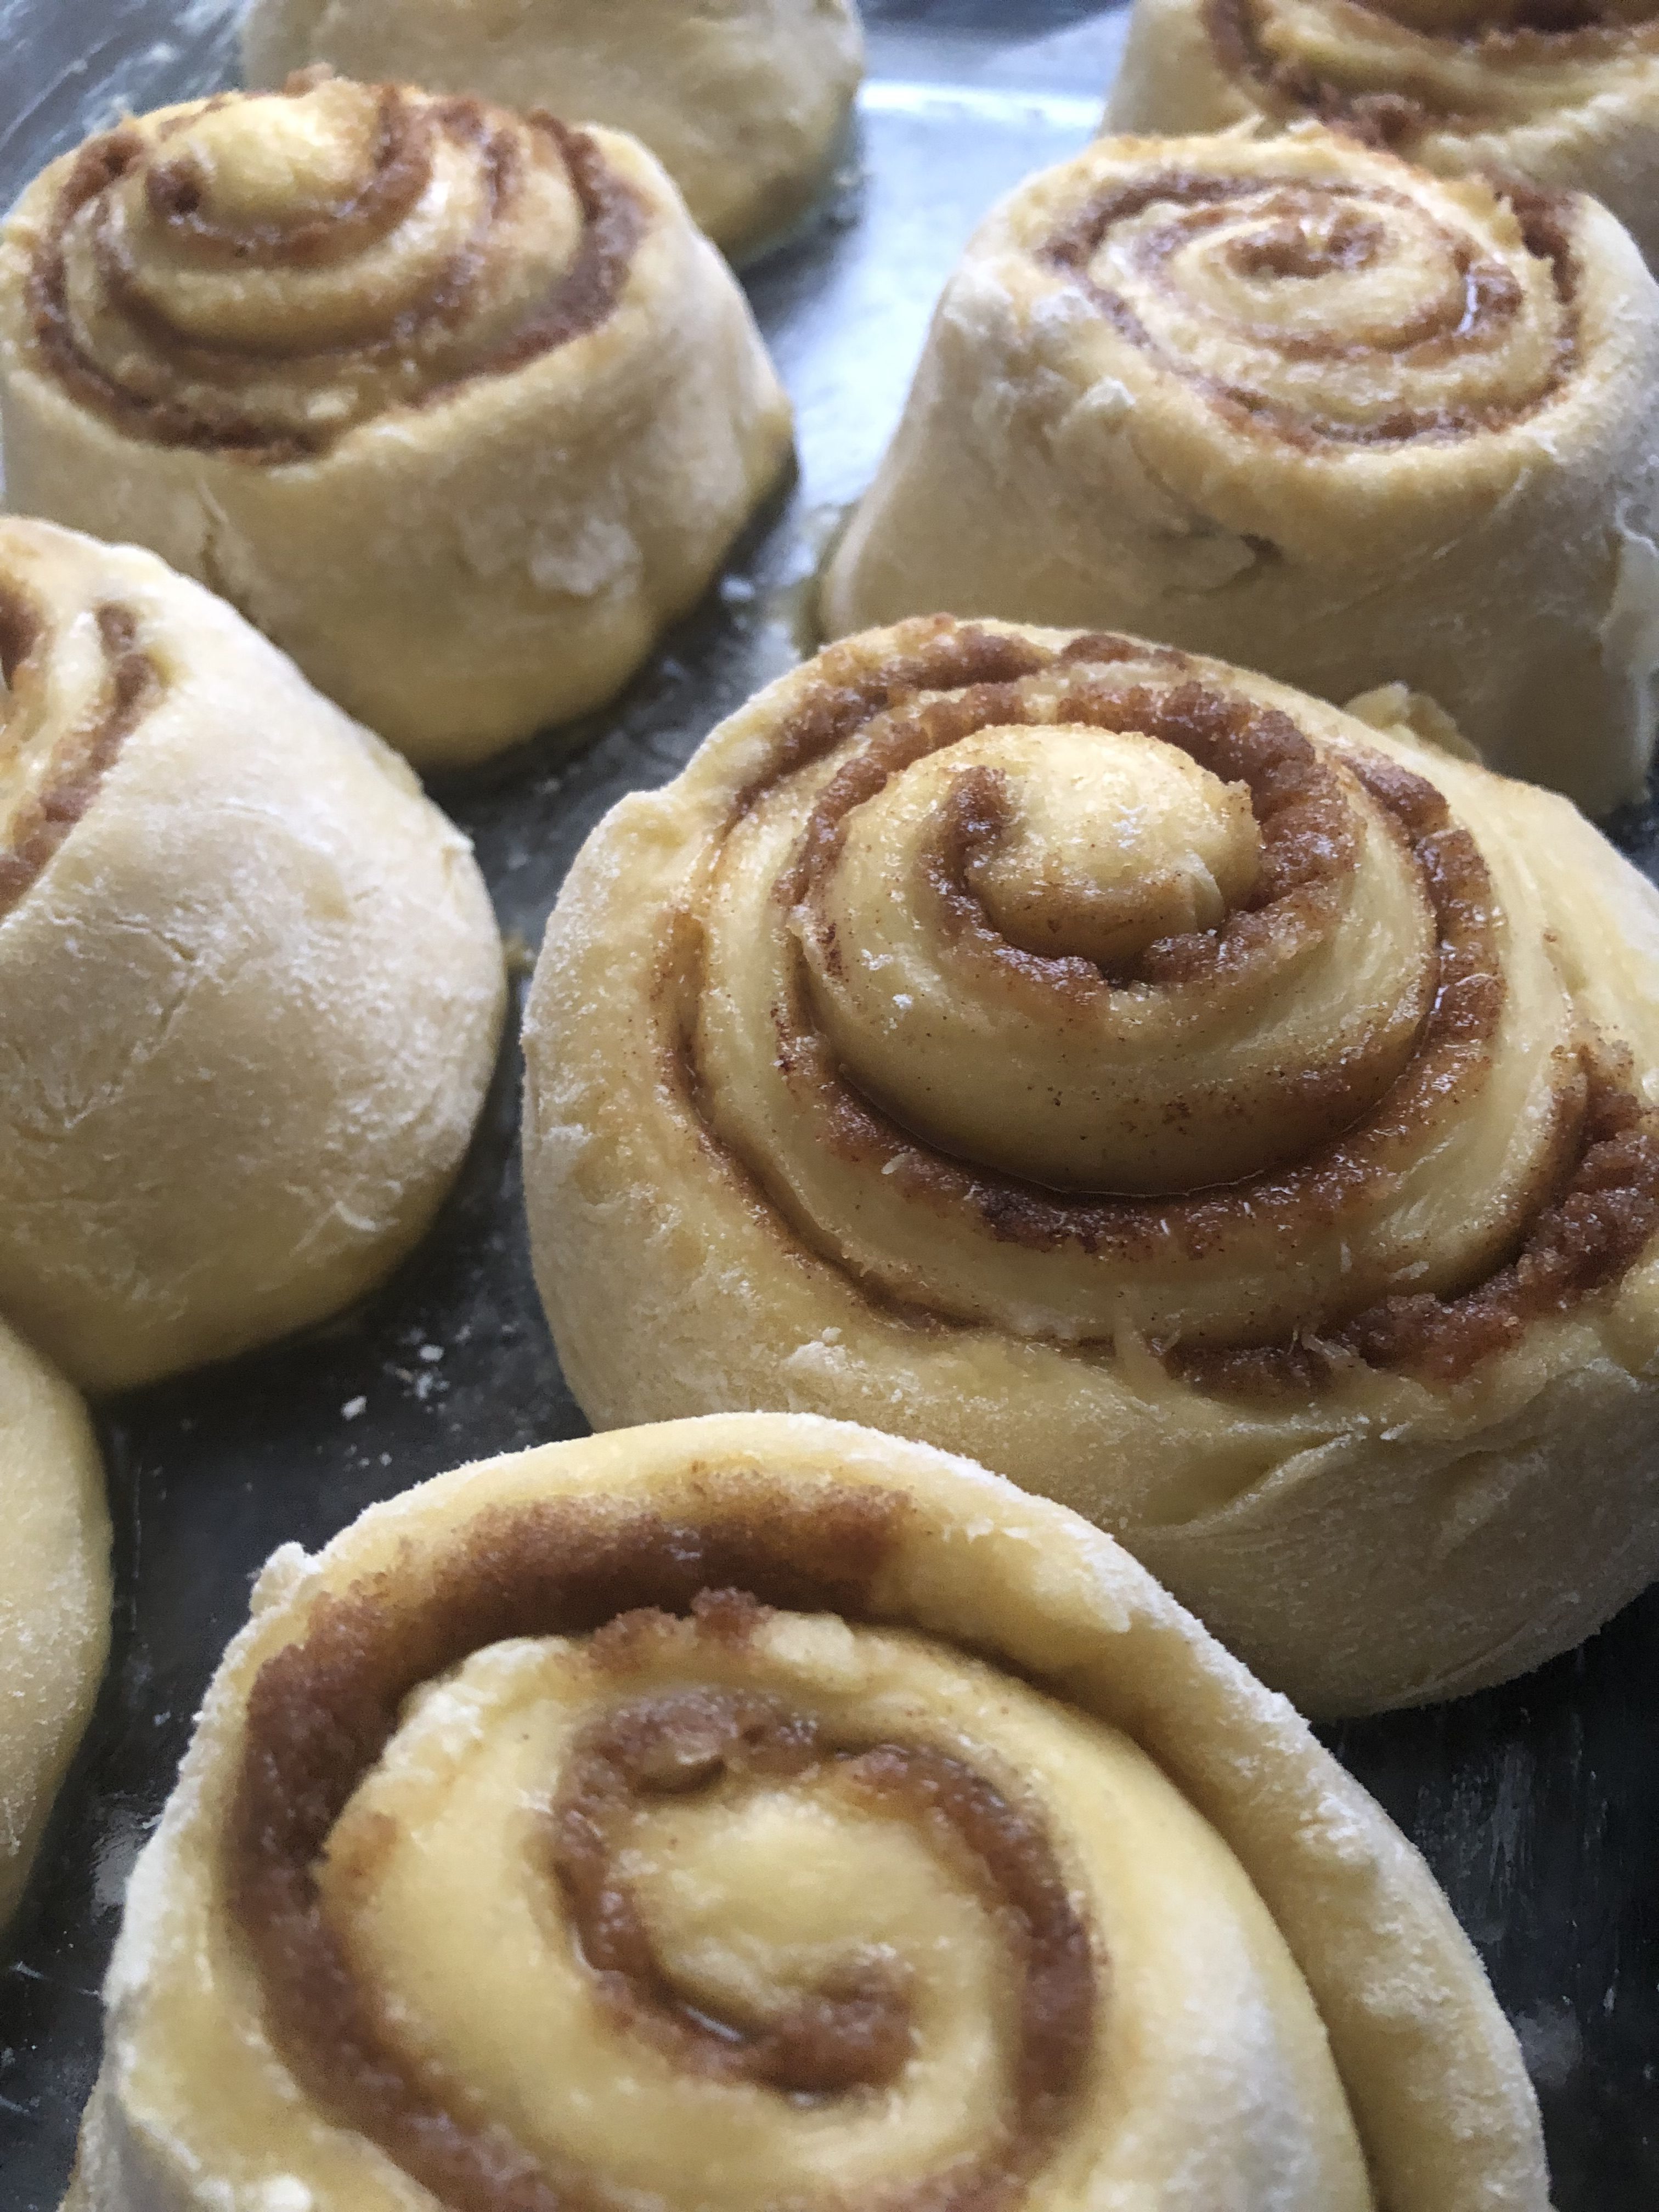 Homemade cinnamon rolls lined up in a glass pan and ready for baking.